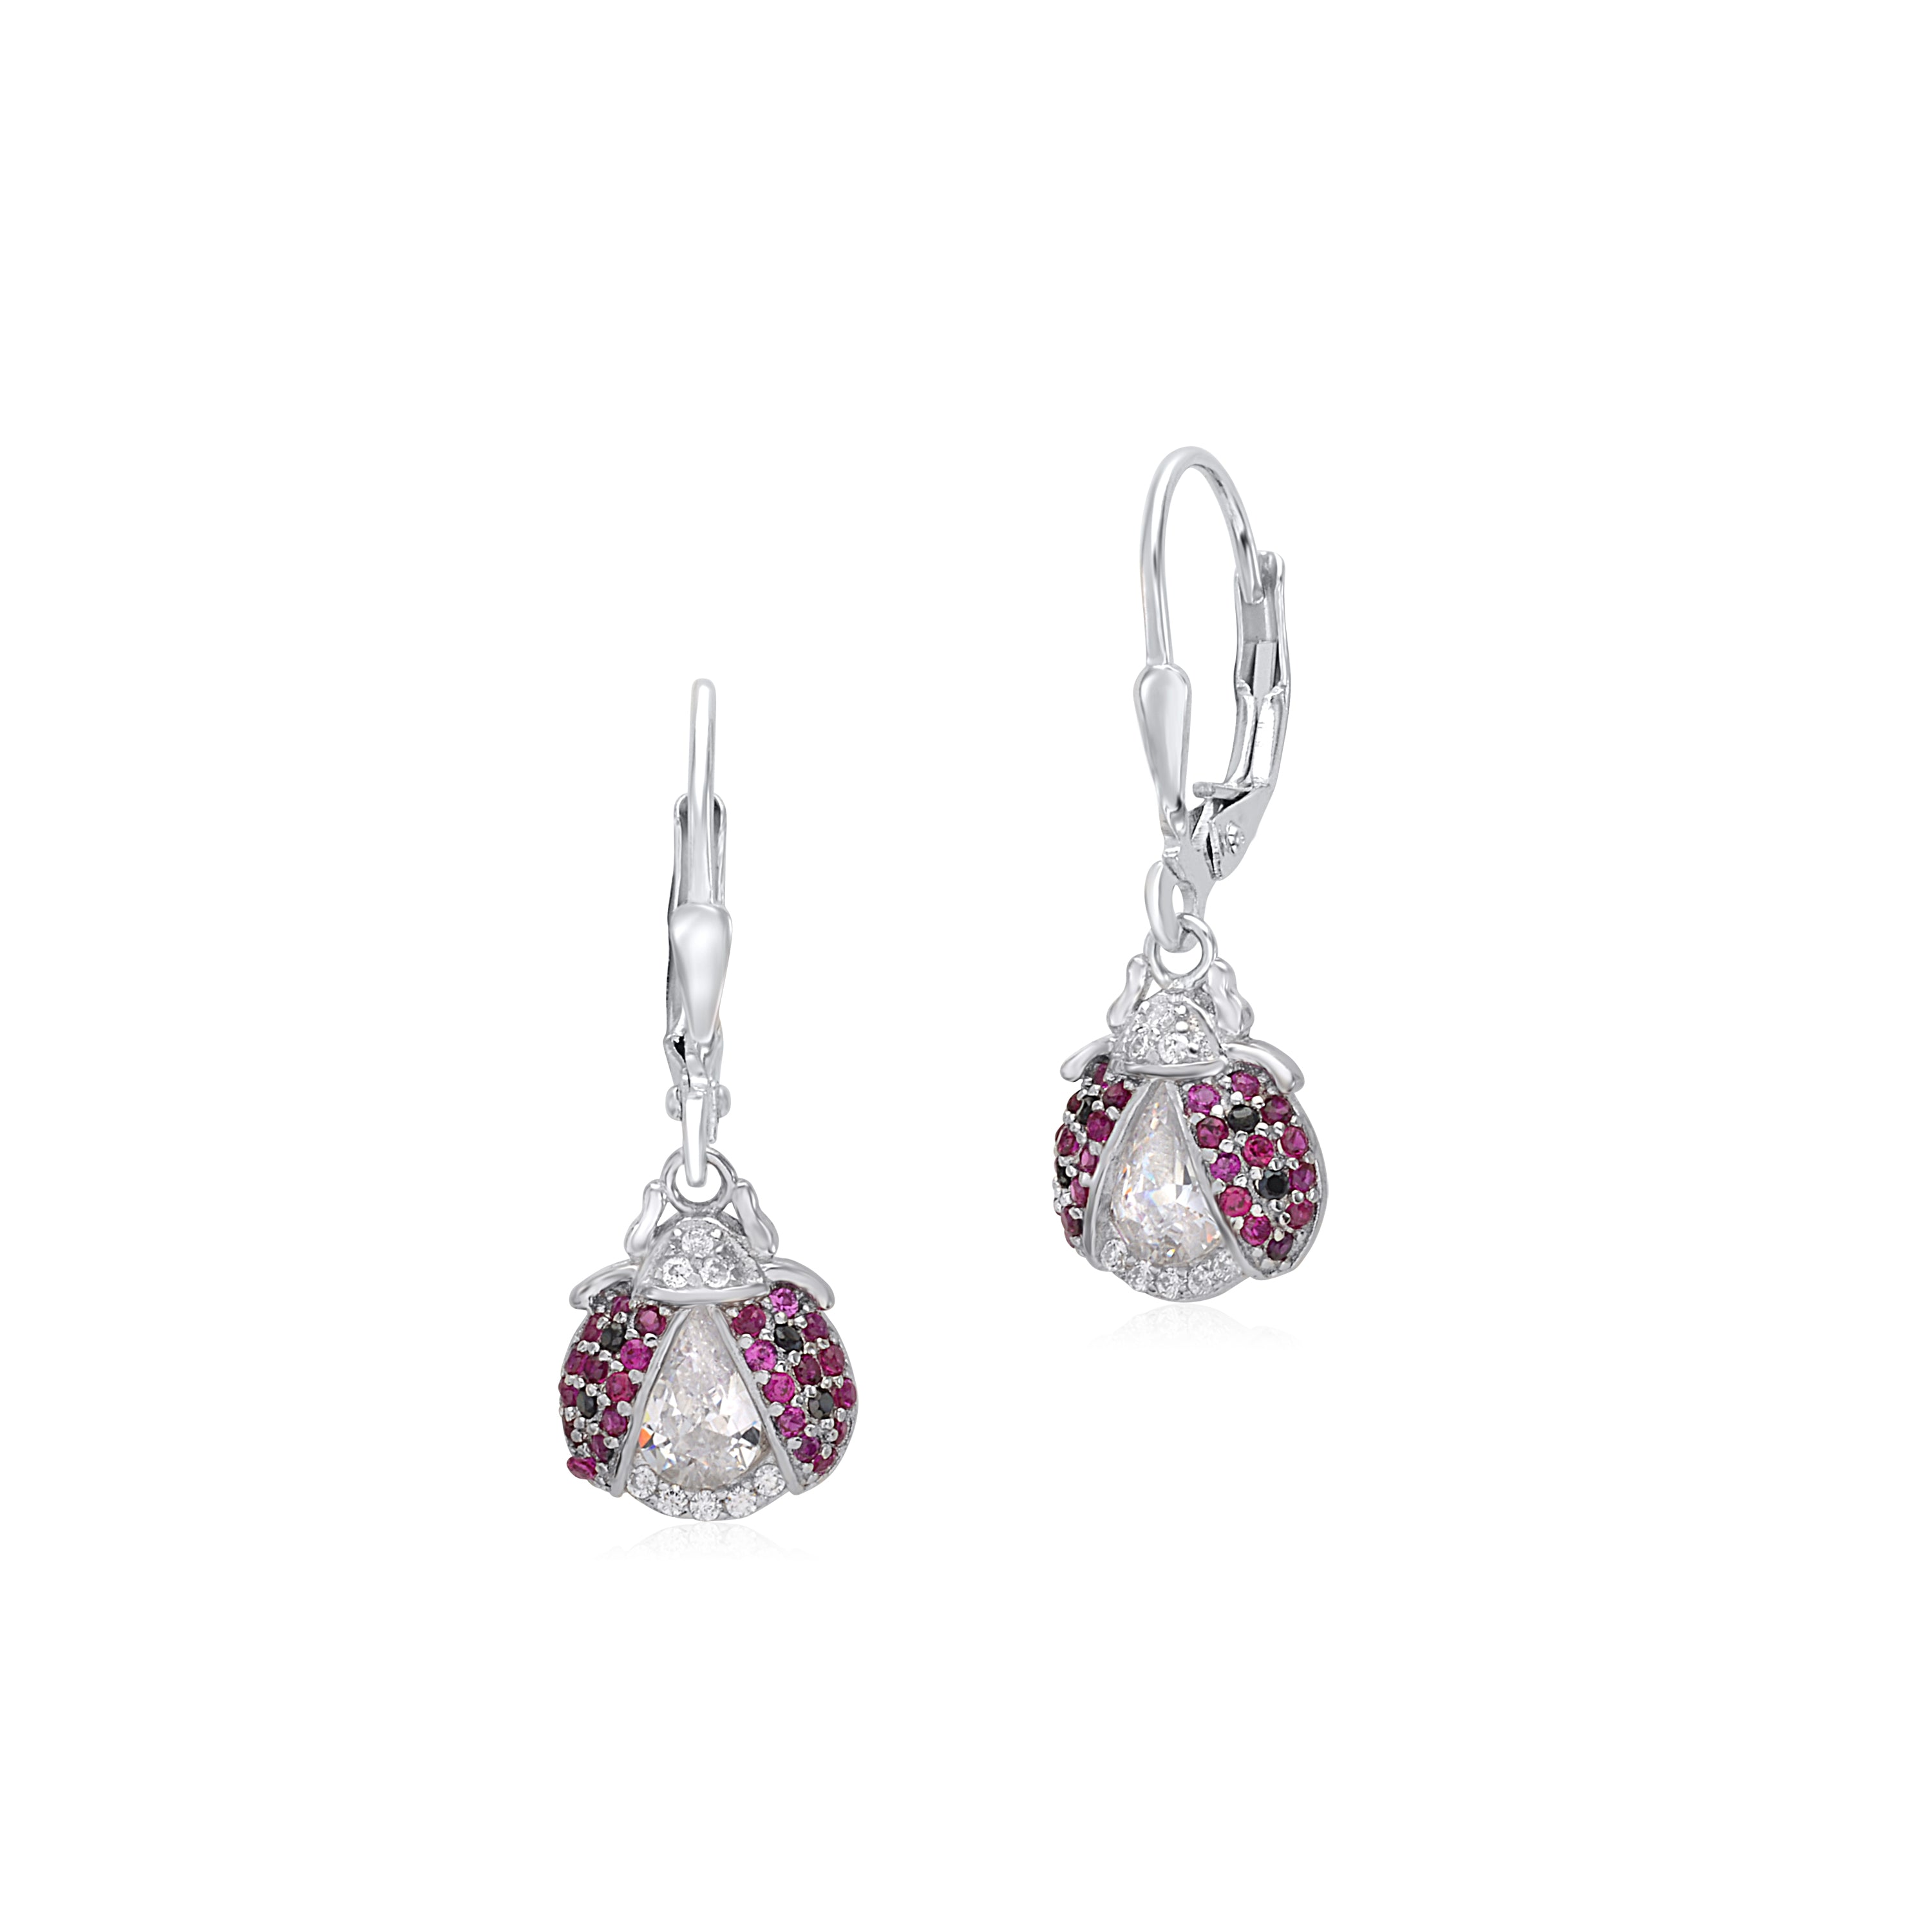 Sterling Silver 925 Large Ladybug Dangle Leverback Earrings with Pave Cubic Zirconia Italy